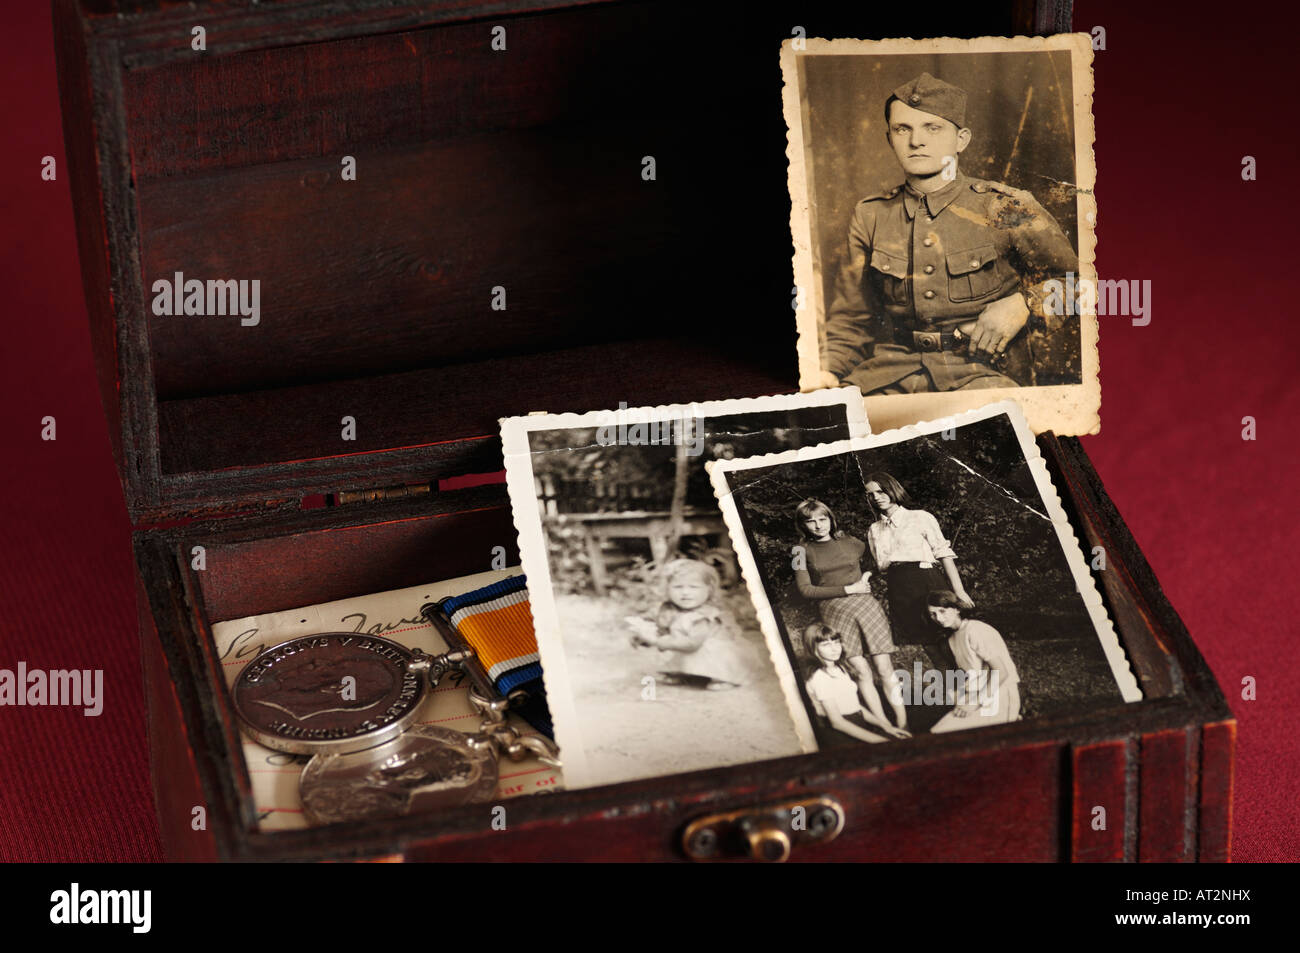 Nostalgia and Memories A Box of Old Photographs Military Medals and Papers All Family Heirlooms Stock Photo